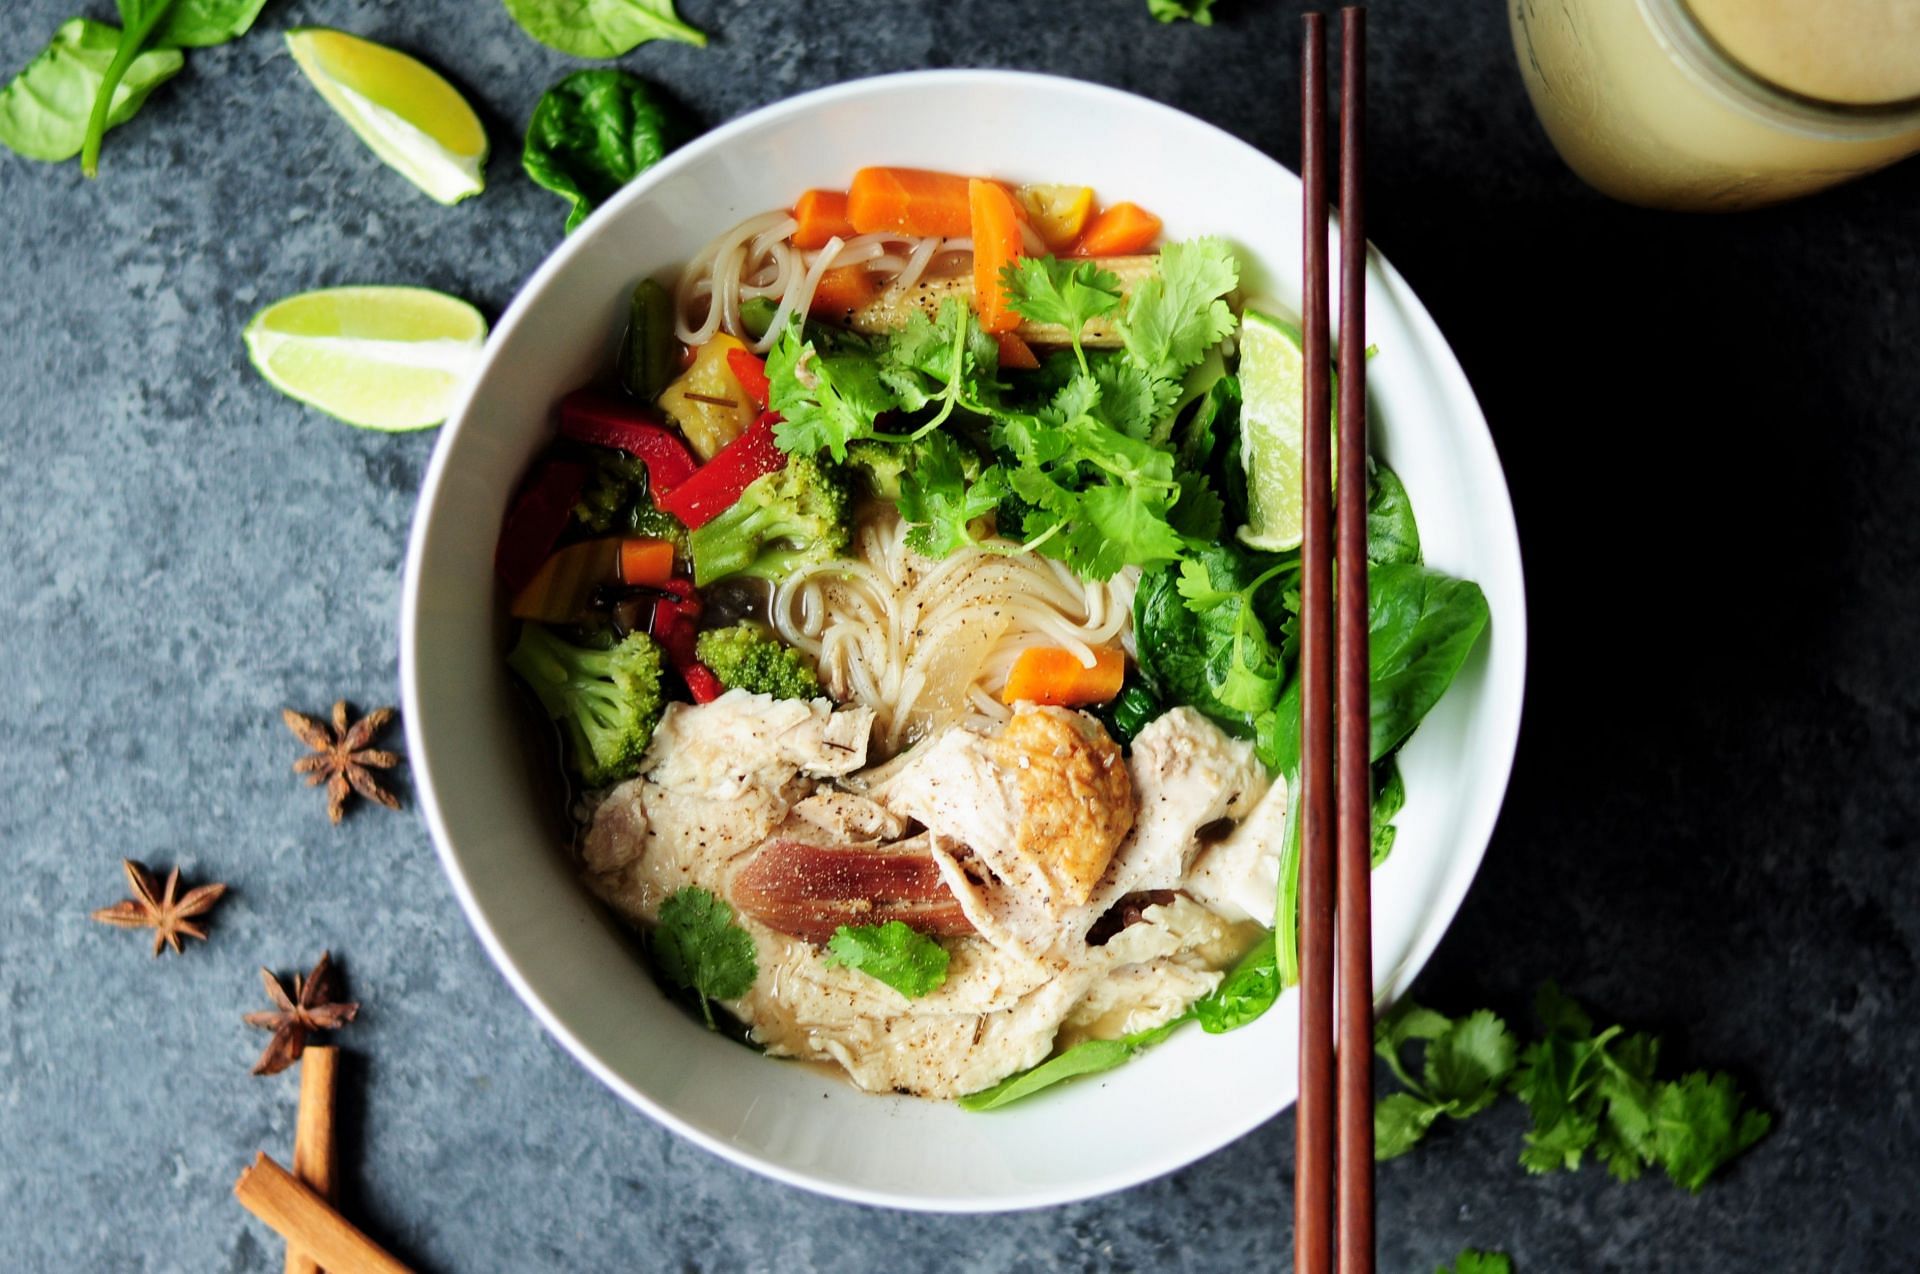 MSG is a popular flavoring agent used in Asian cooking (Image via Unsplash/Sharon Chen)